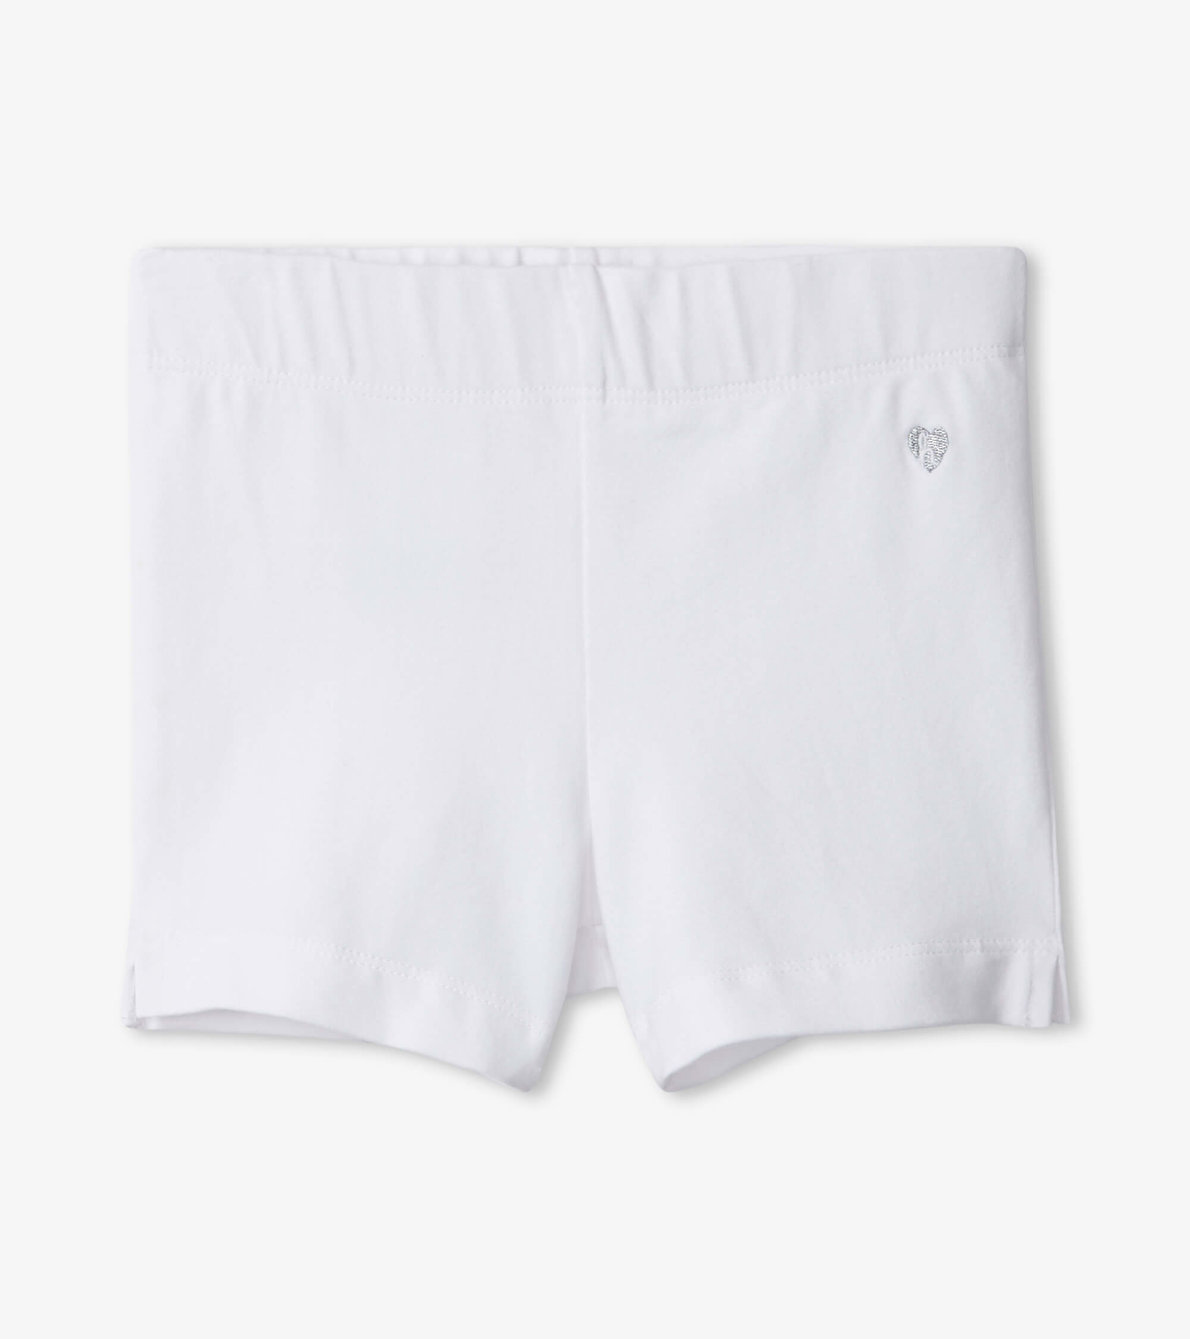 View larger image of Girls White Summer Shorts